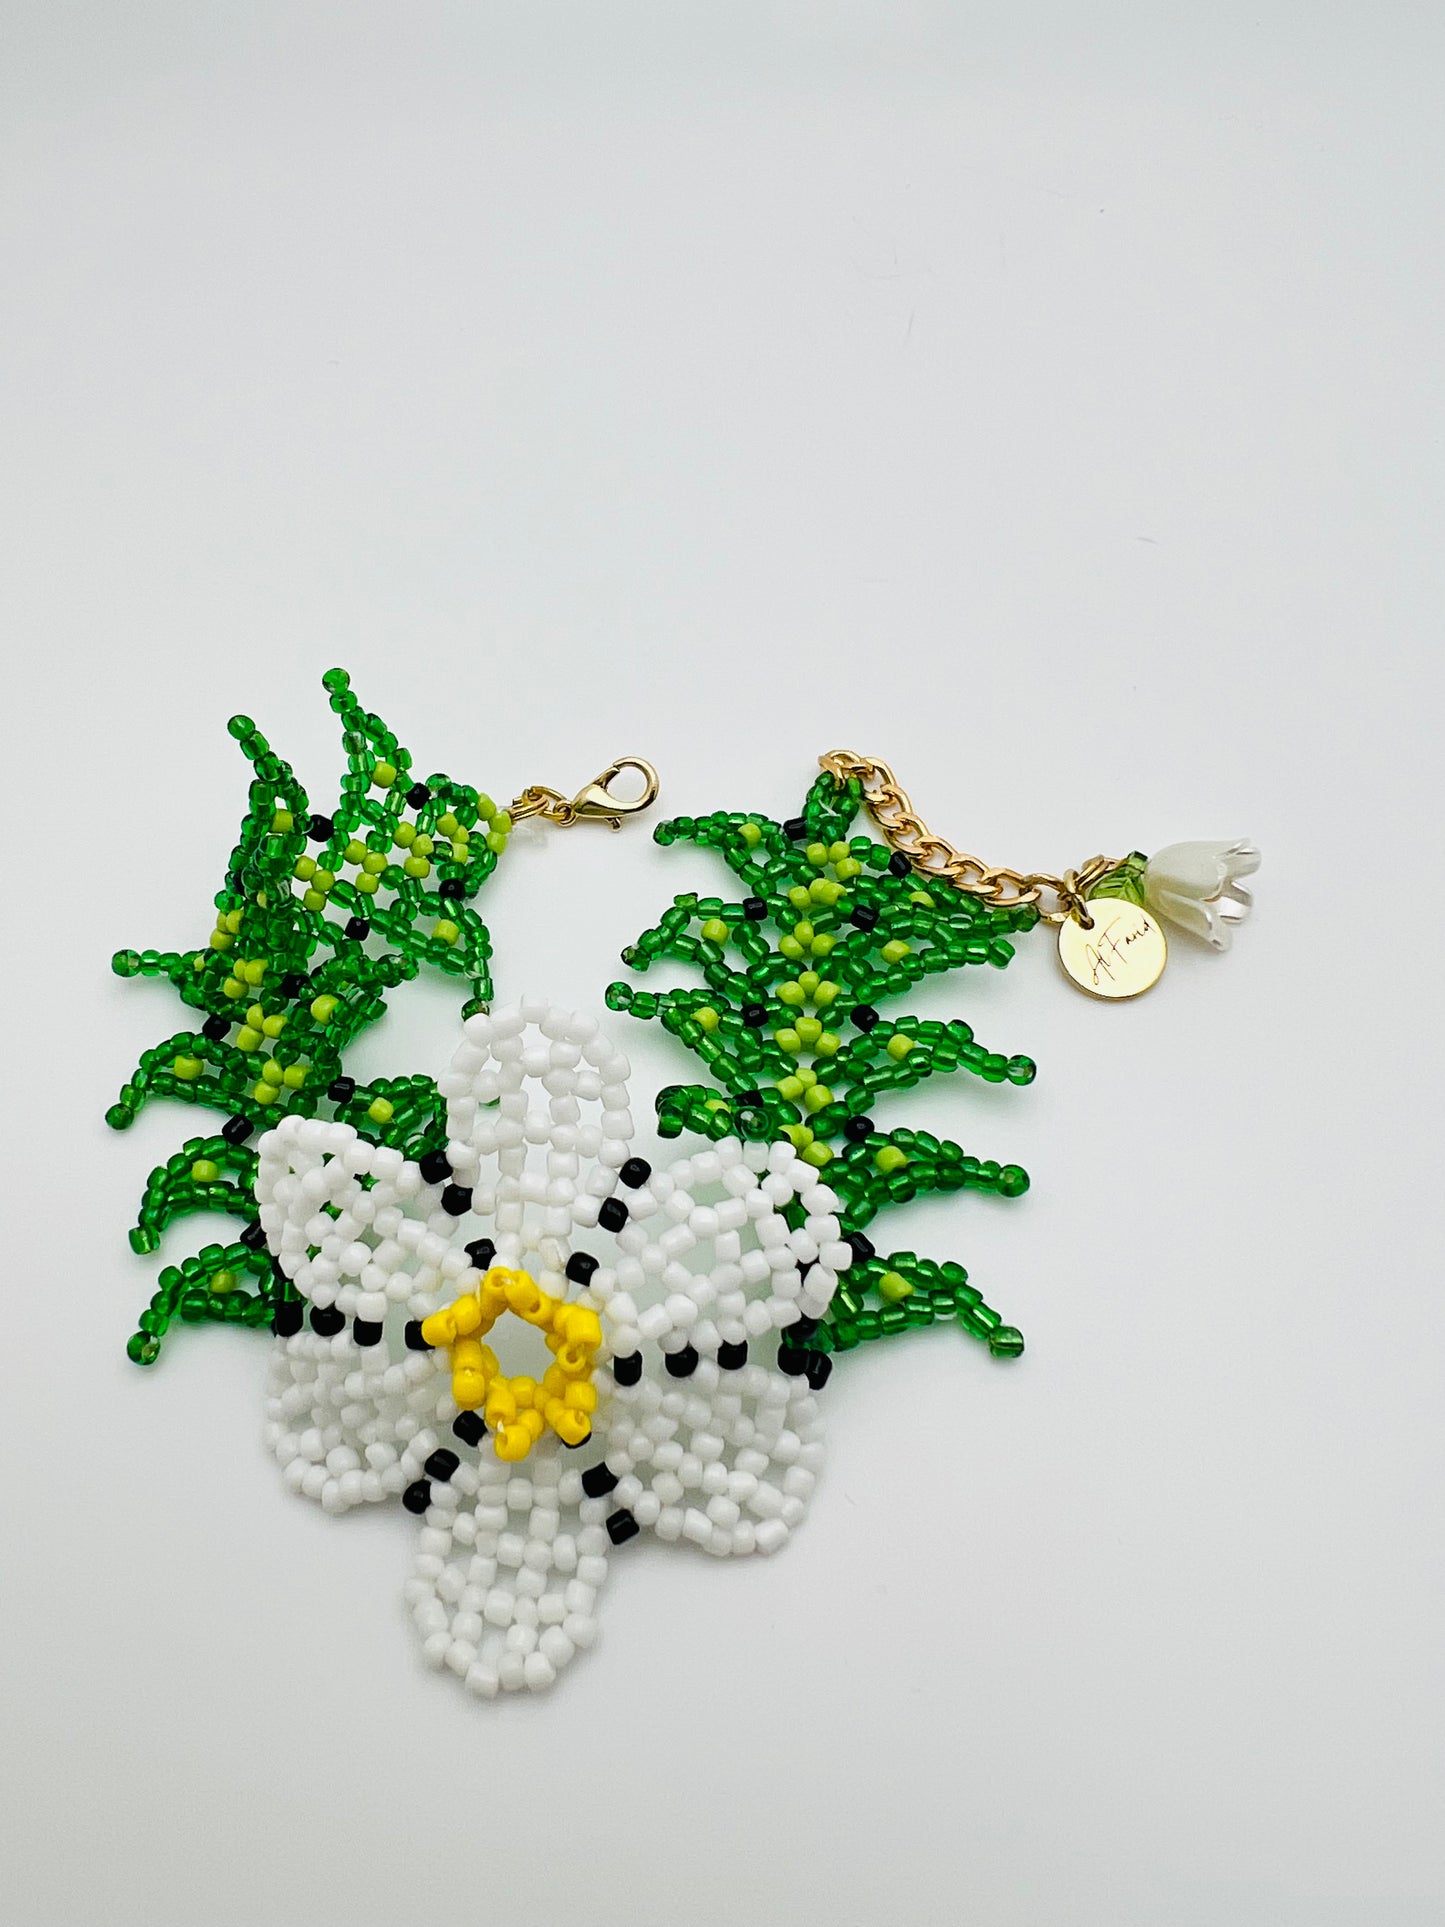 Beaded Yellow Green Flowers Necklace With Beaded Matching Earrings & Bracelet